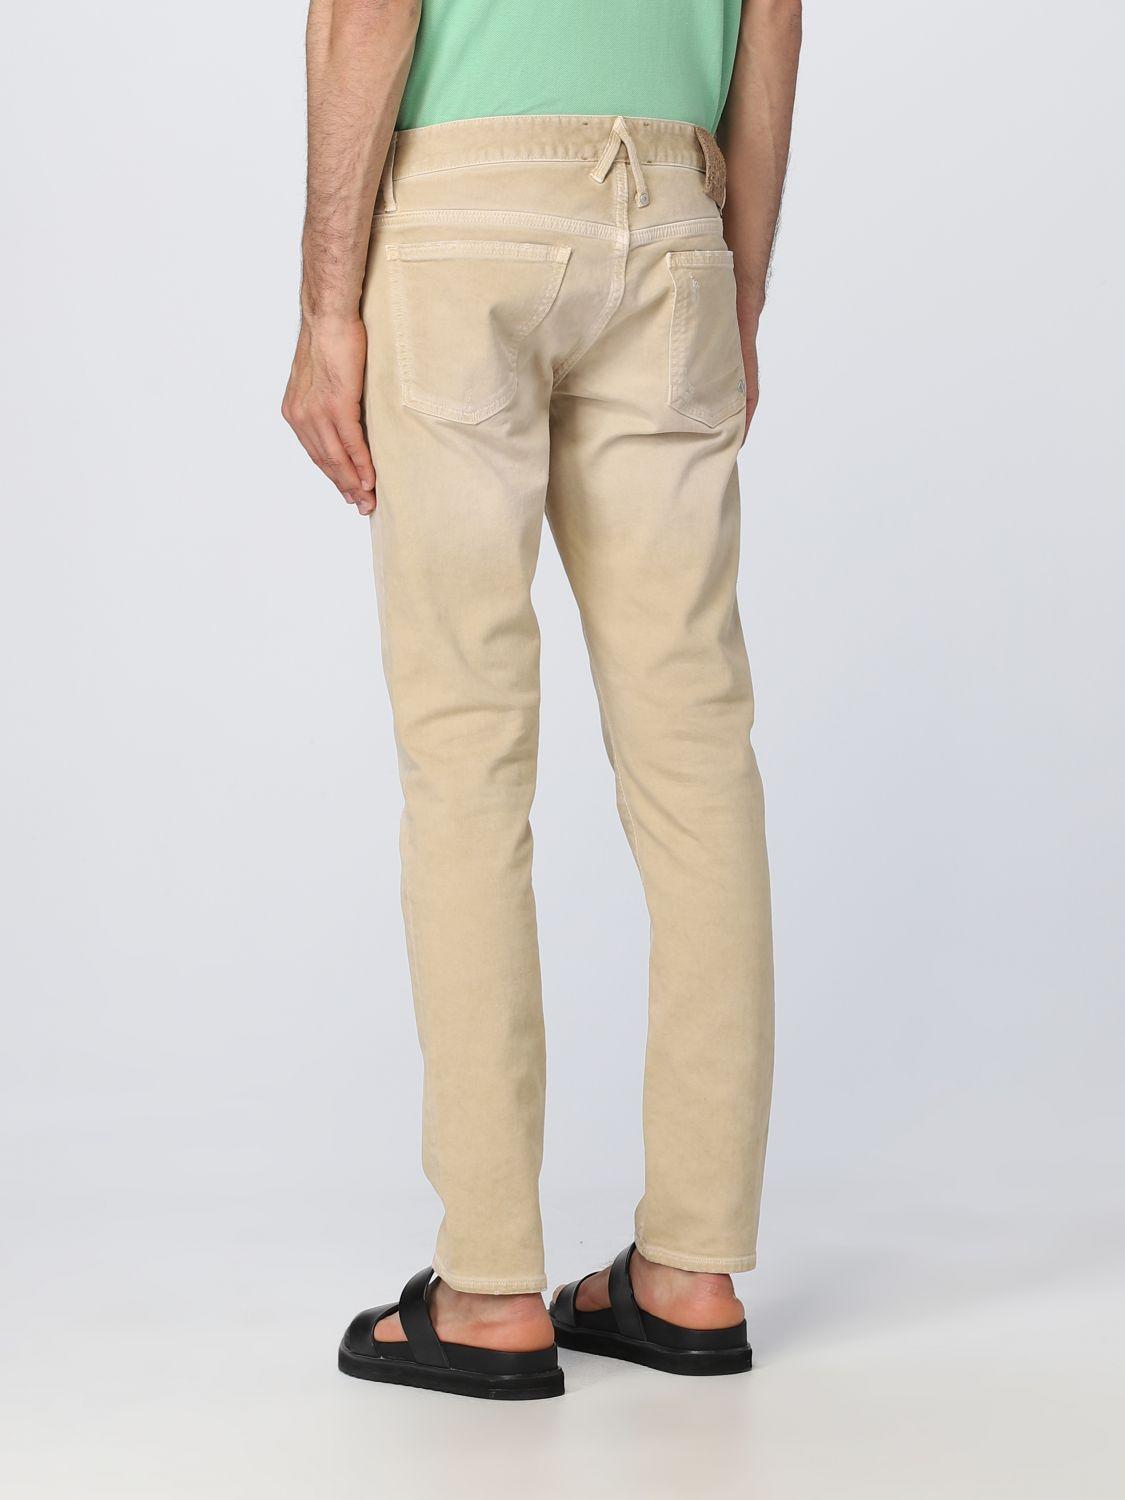 CYCLE Jeans in Natural for Men | Lyst